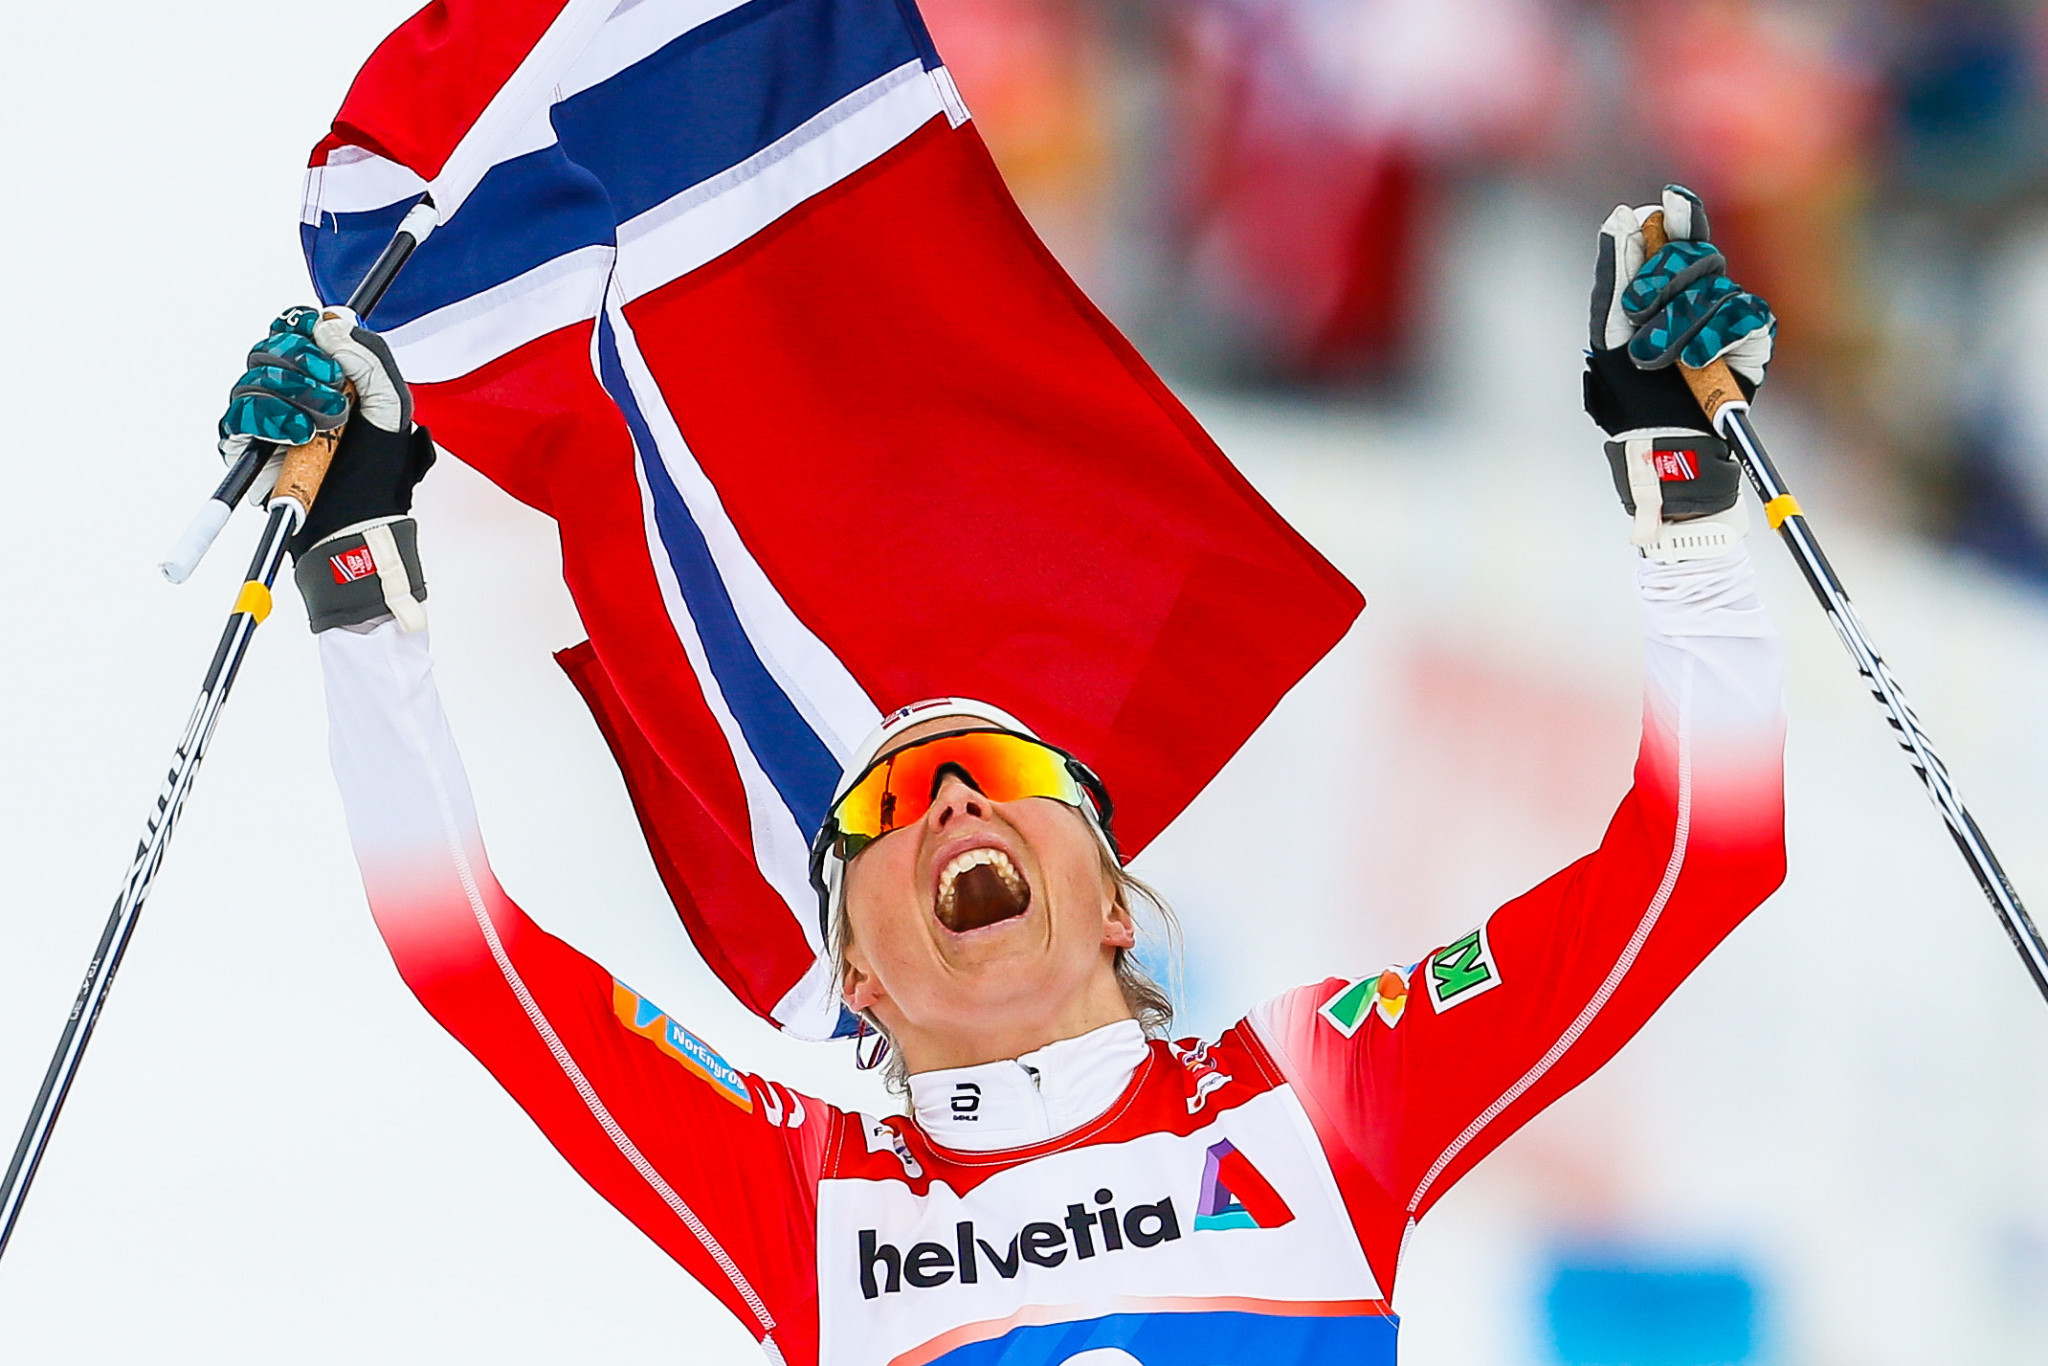 Johaug earns third title on successful day for Norway at FIS Nordic World Ski Championships